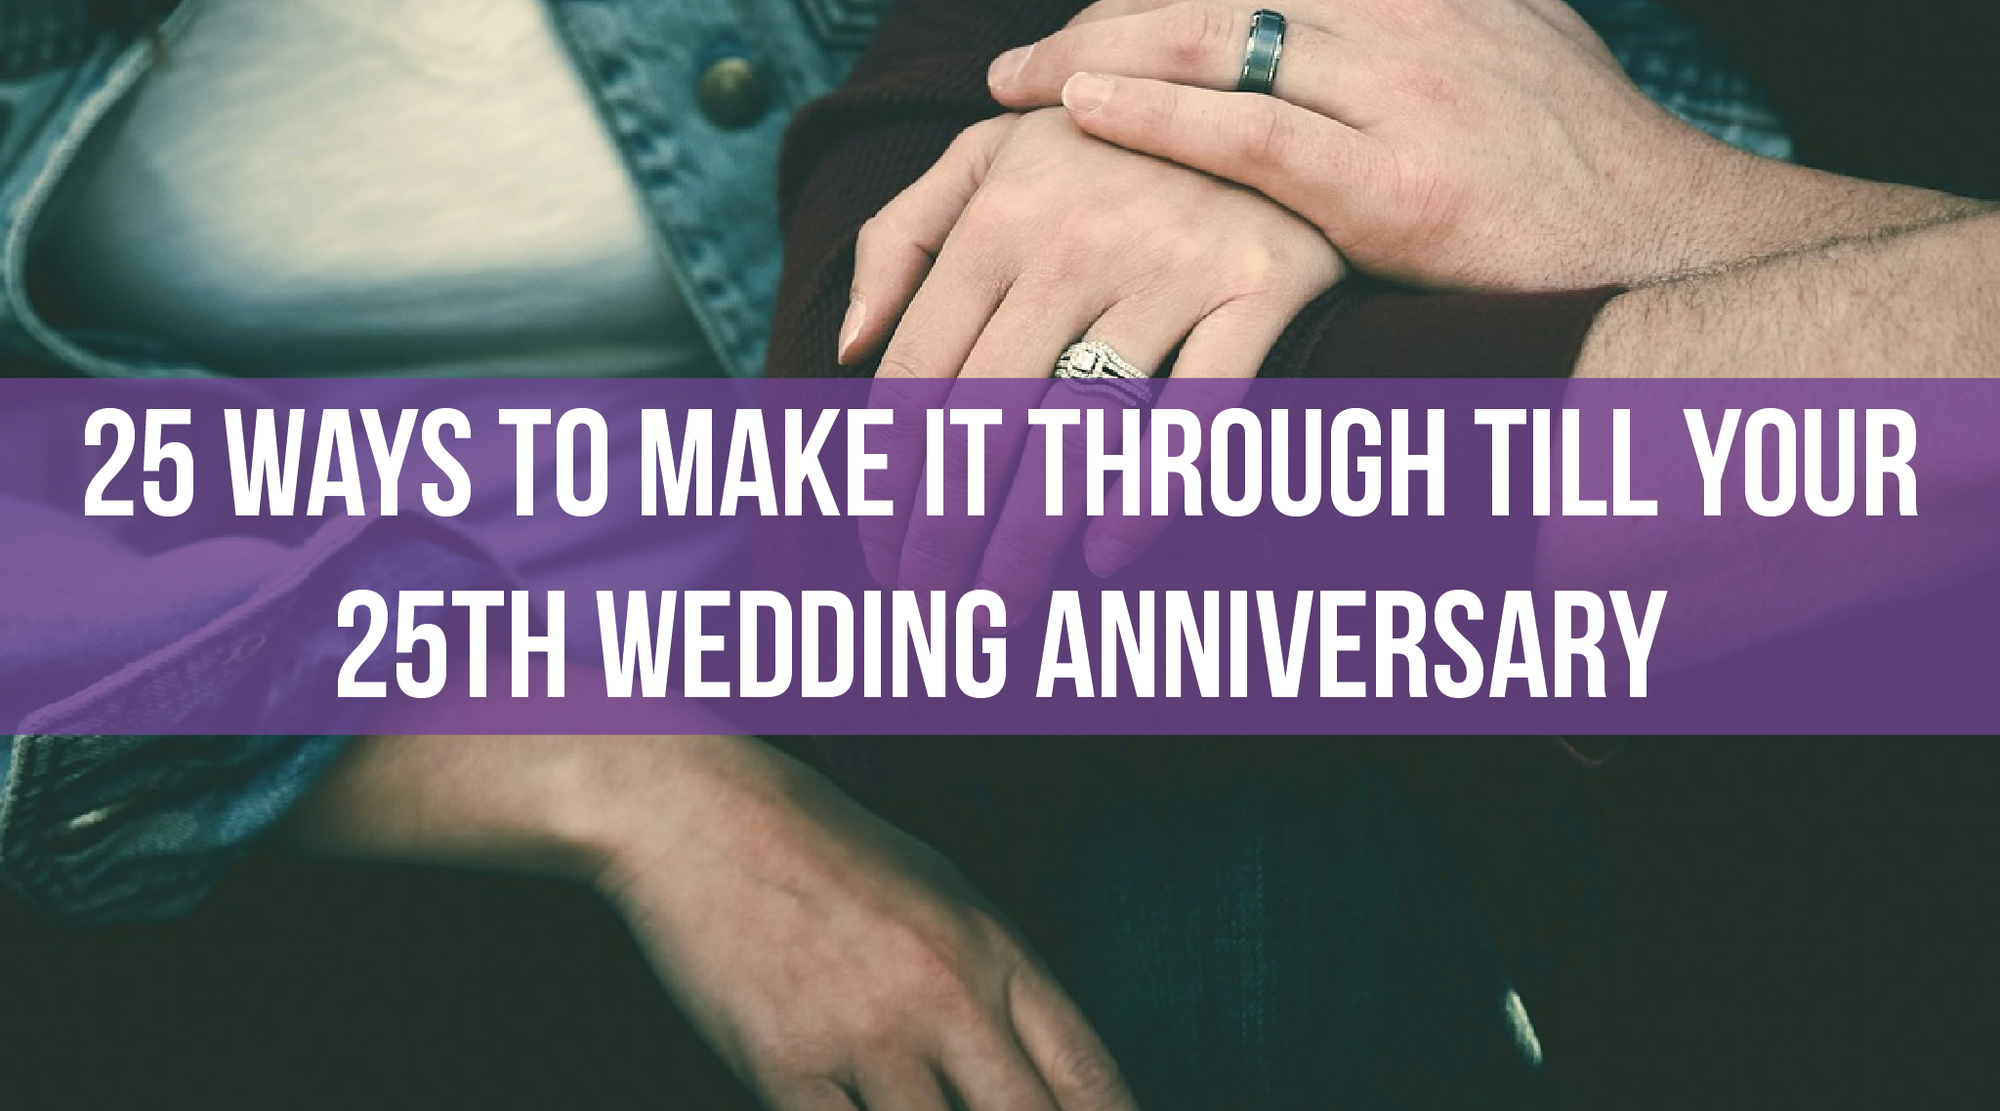 25 Ways to Make it Through Till Your 25th Wedding Anniversary